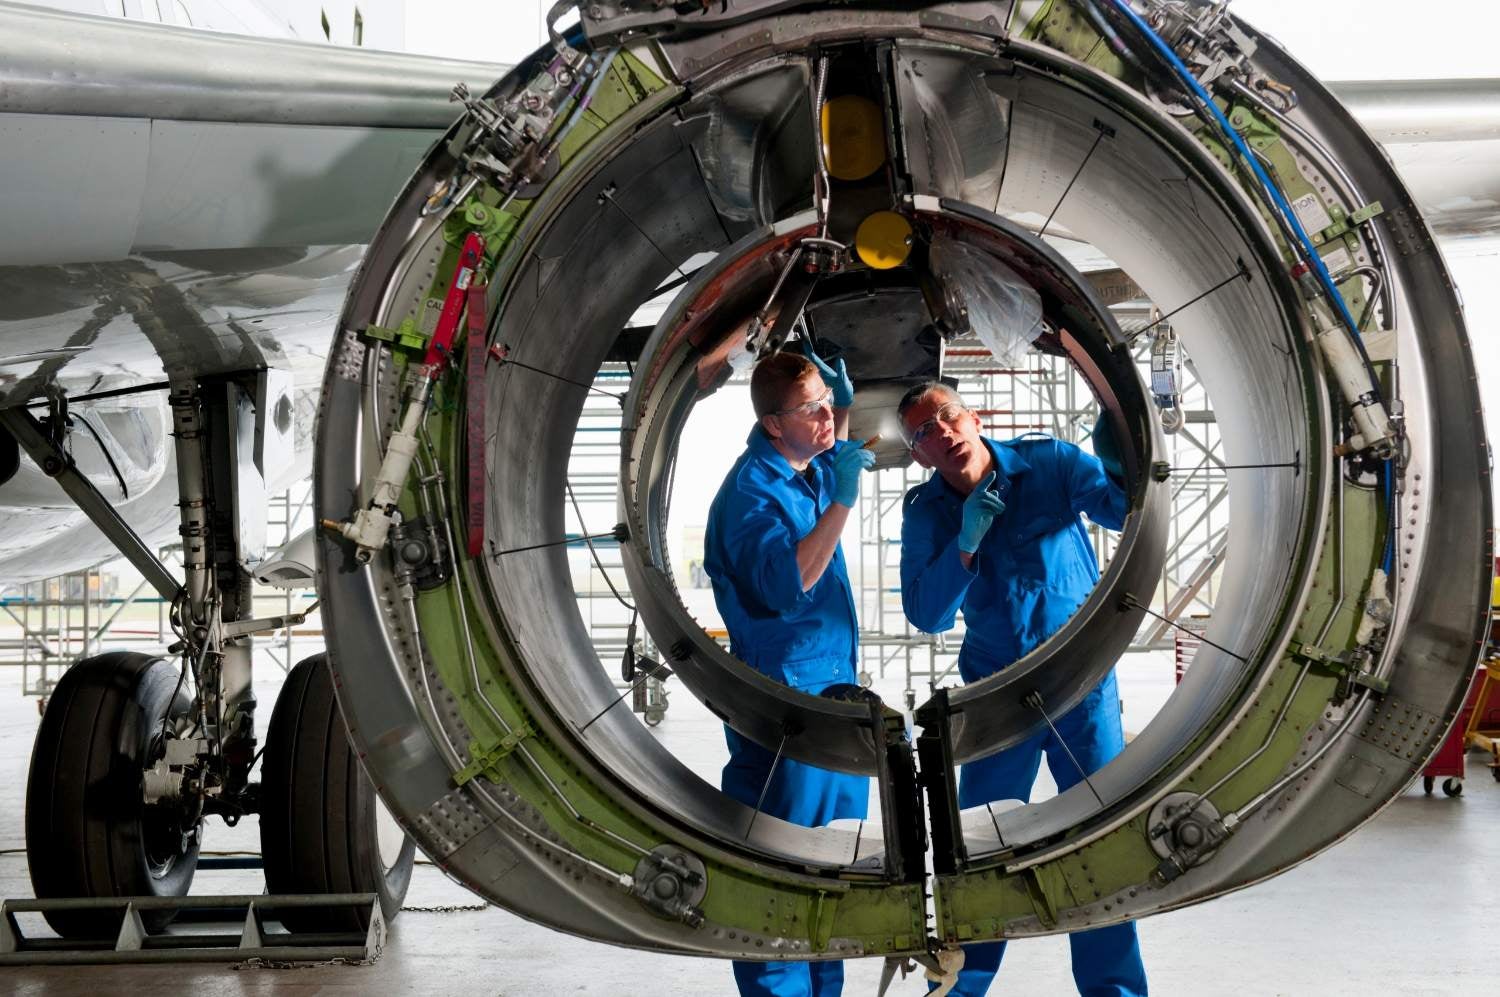 Two airplane technicians inspecting the plane's parts